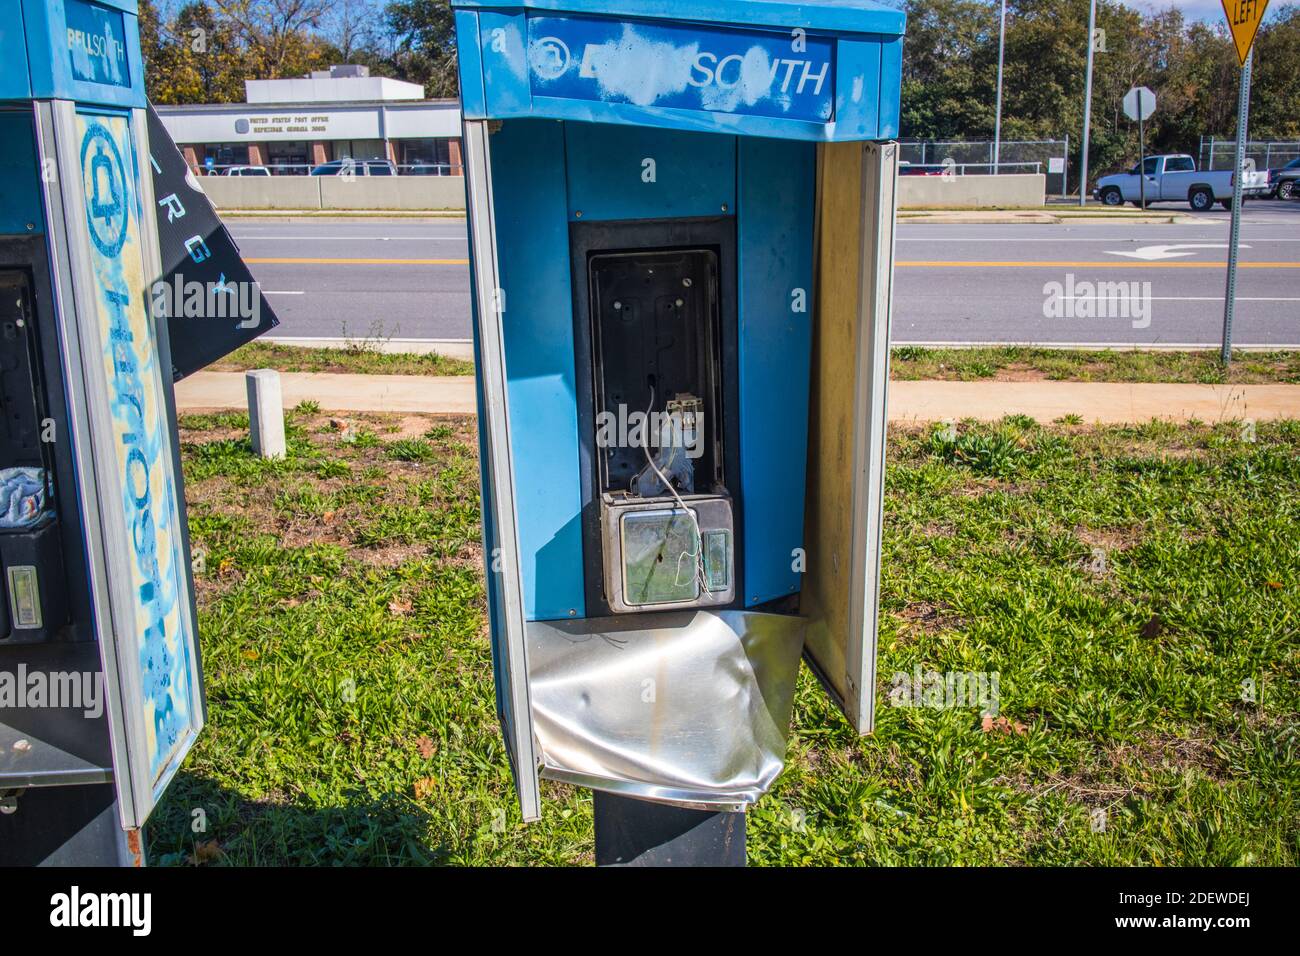 Hephzibah, Ga USA - 12 01 20: Old payphone booth with the phone missing vintage trash close up Stock Photo